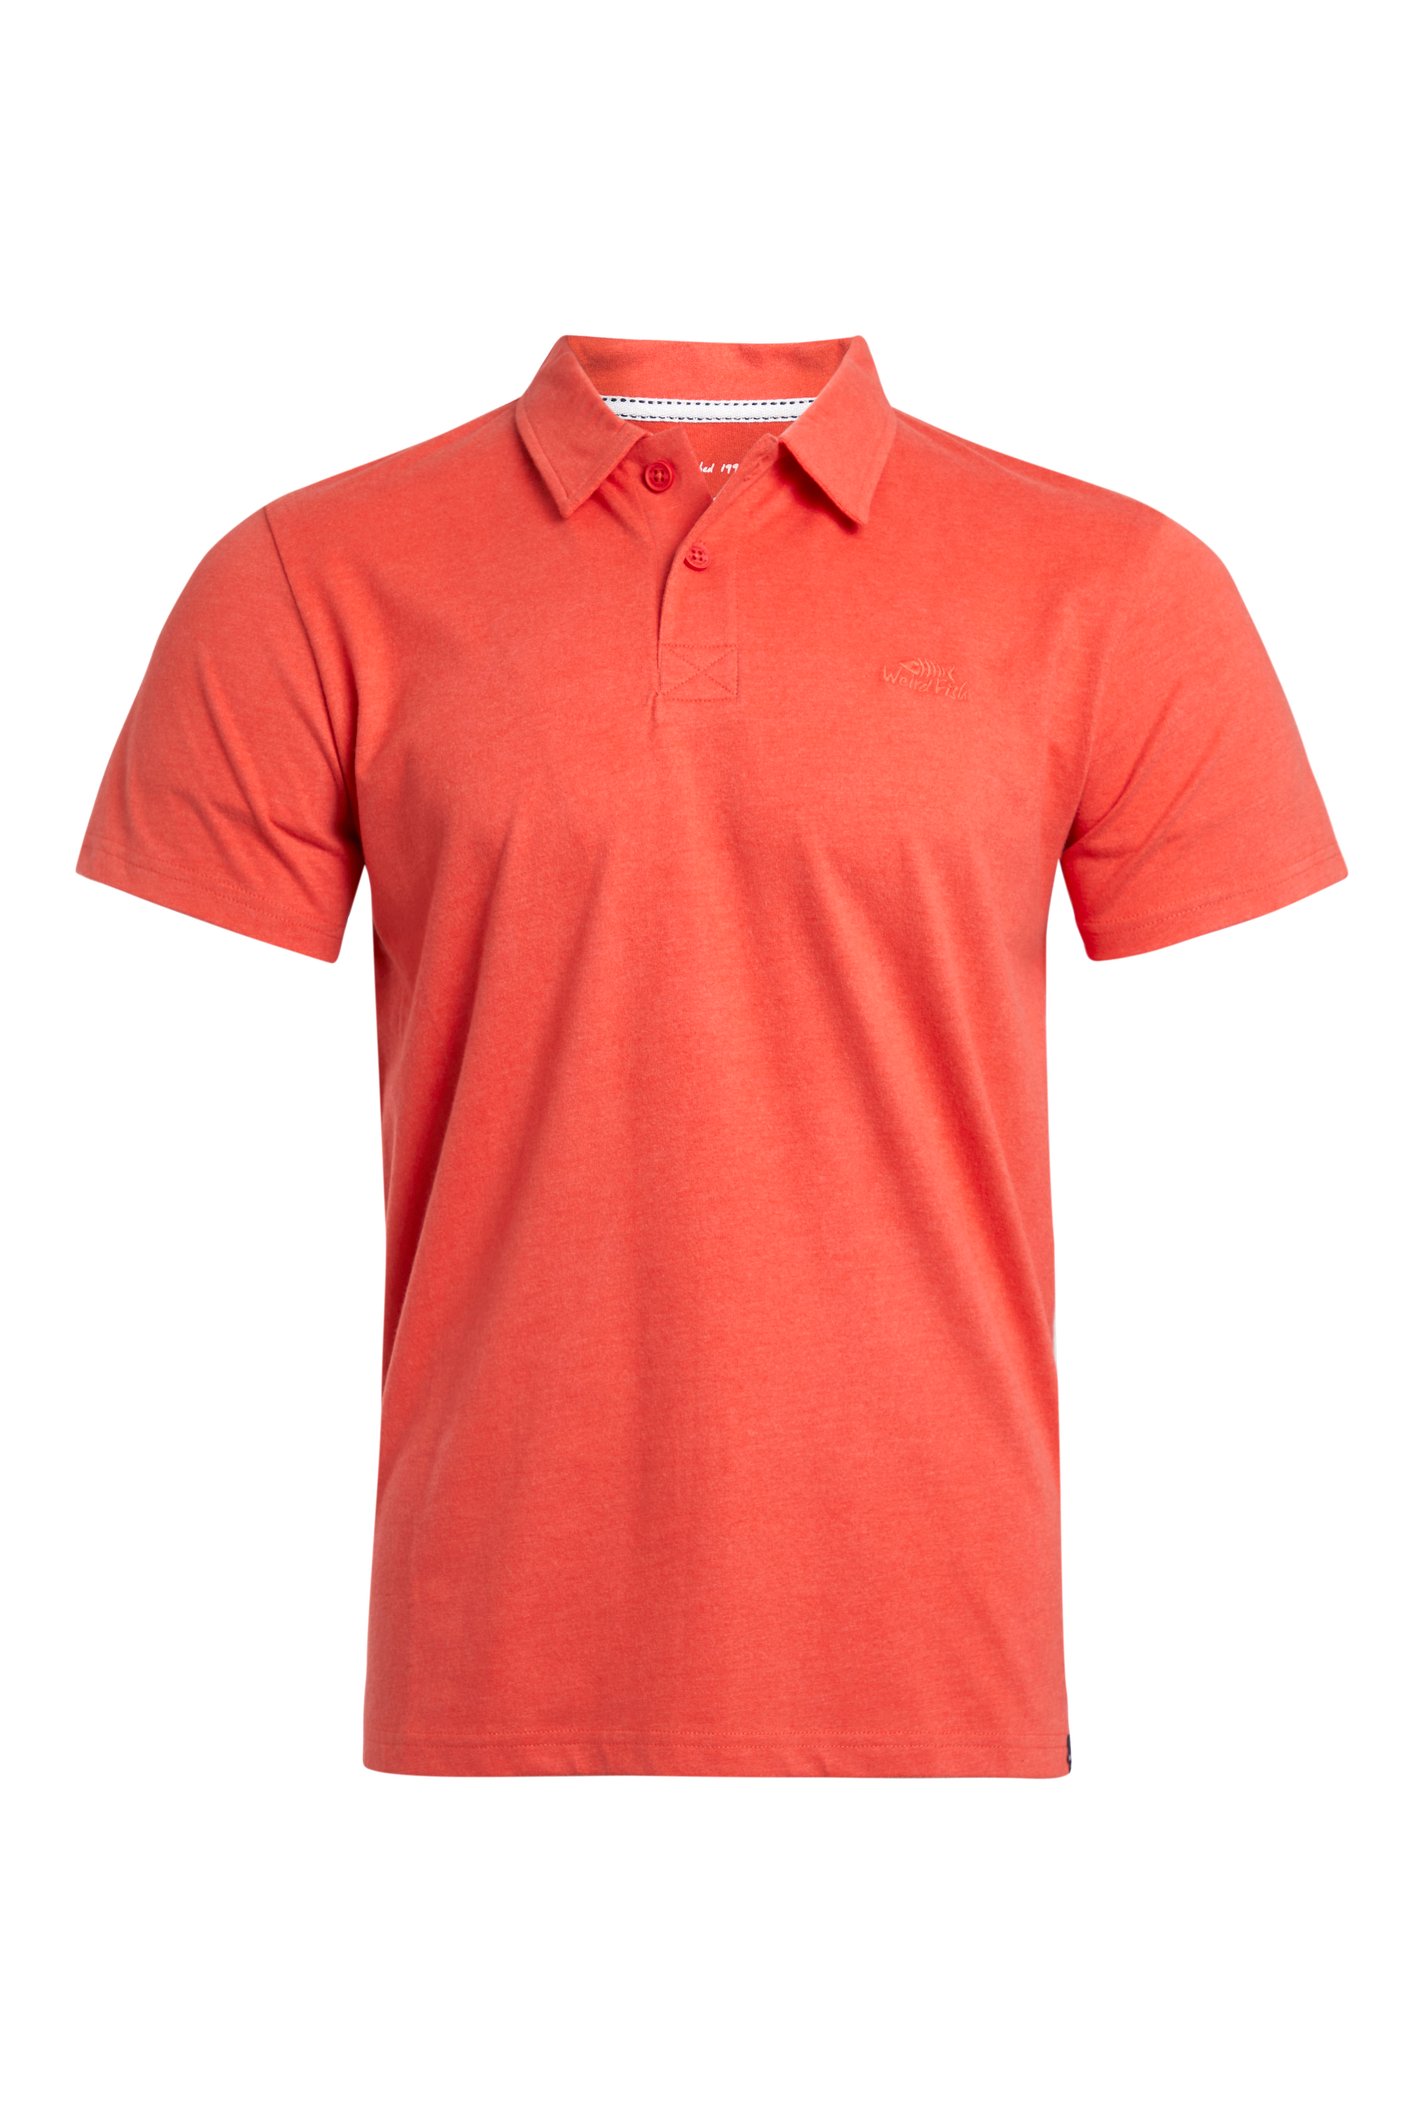 Weird Fish Jetstream Eco Branded Polo Hot Coral Size L